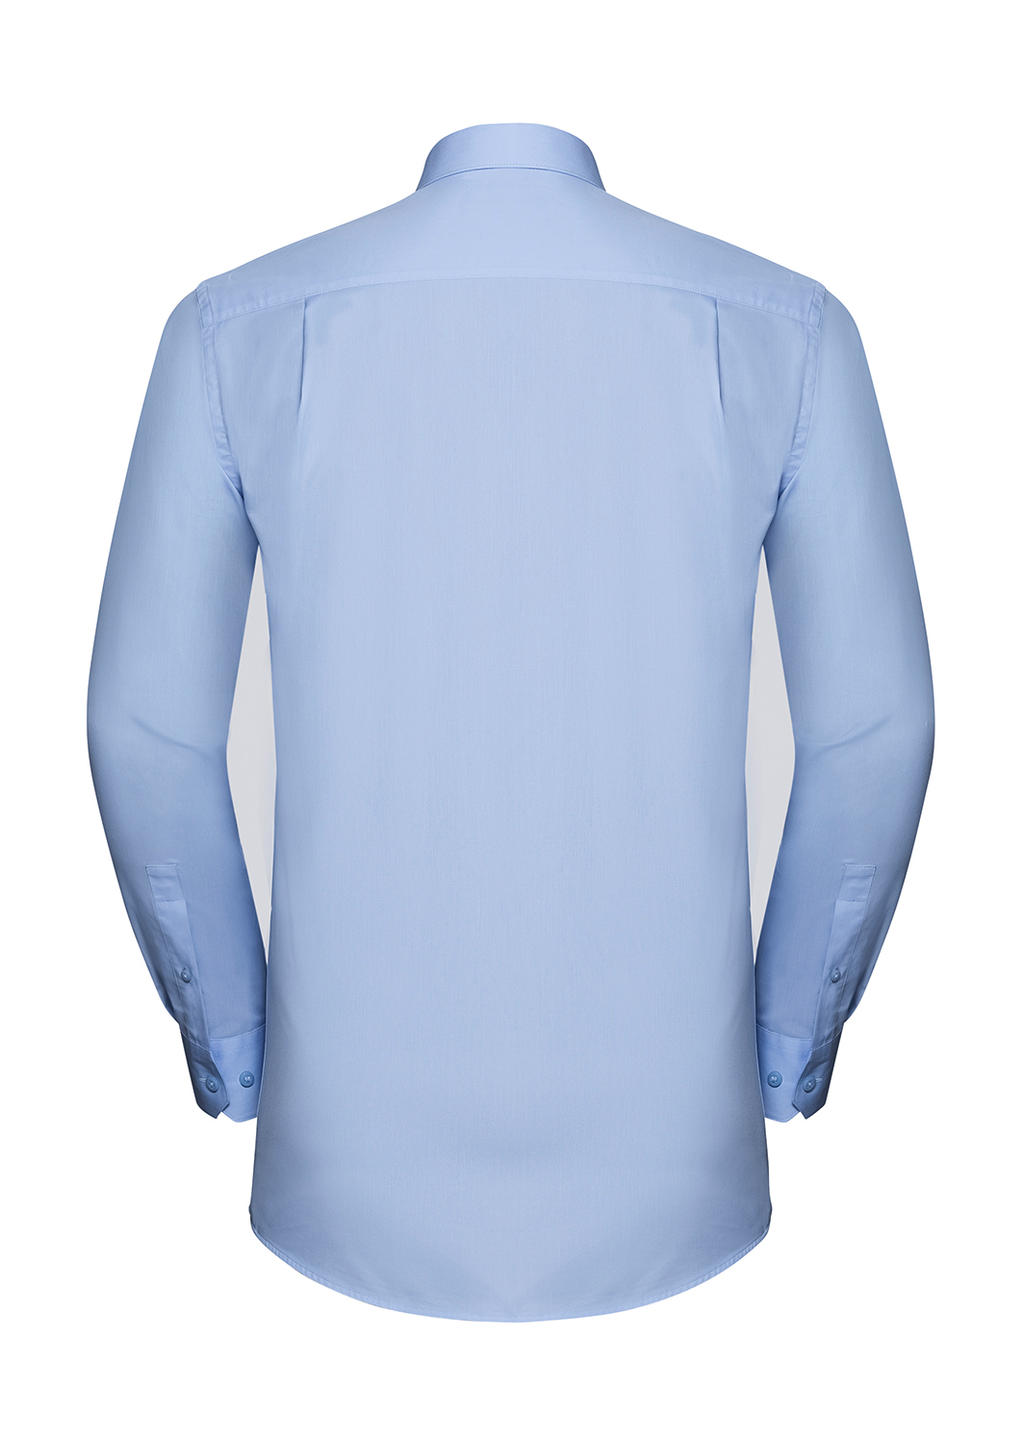  Mens LS Tailored Coolmax? Shirt in Farbe White